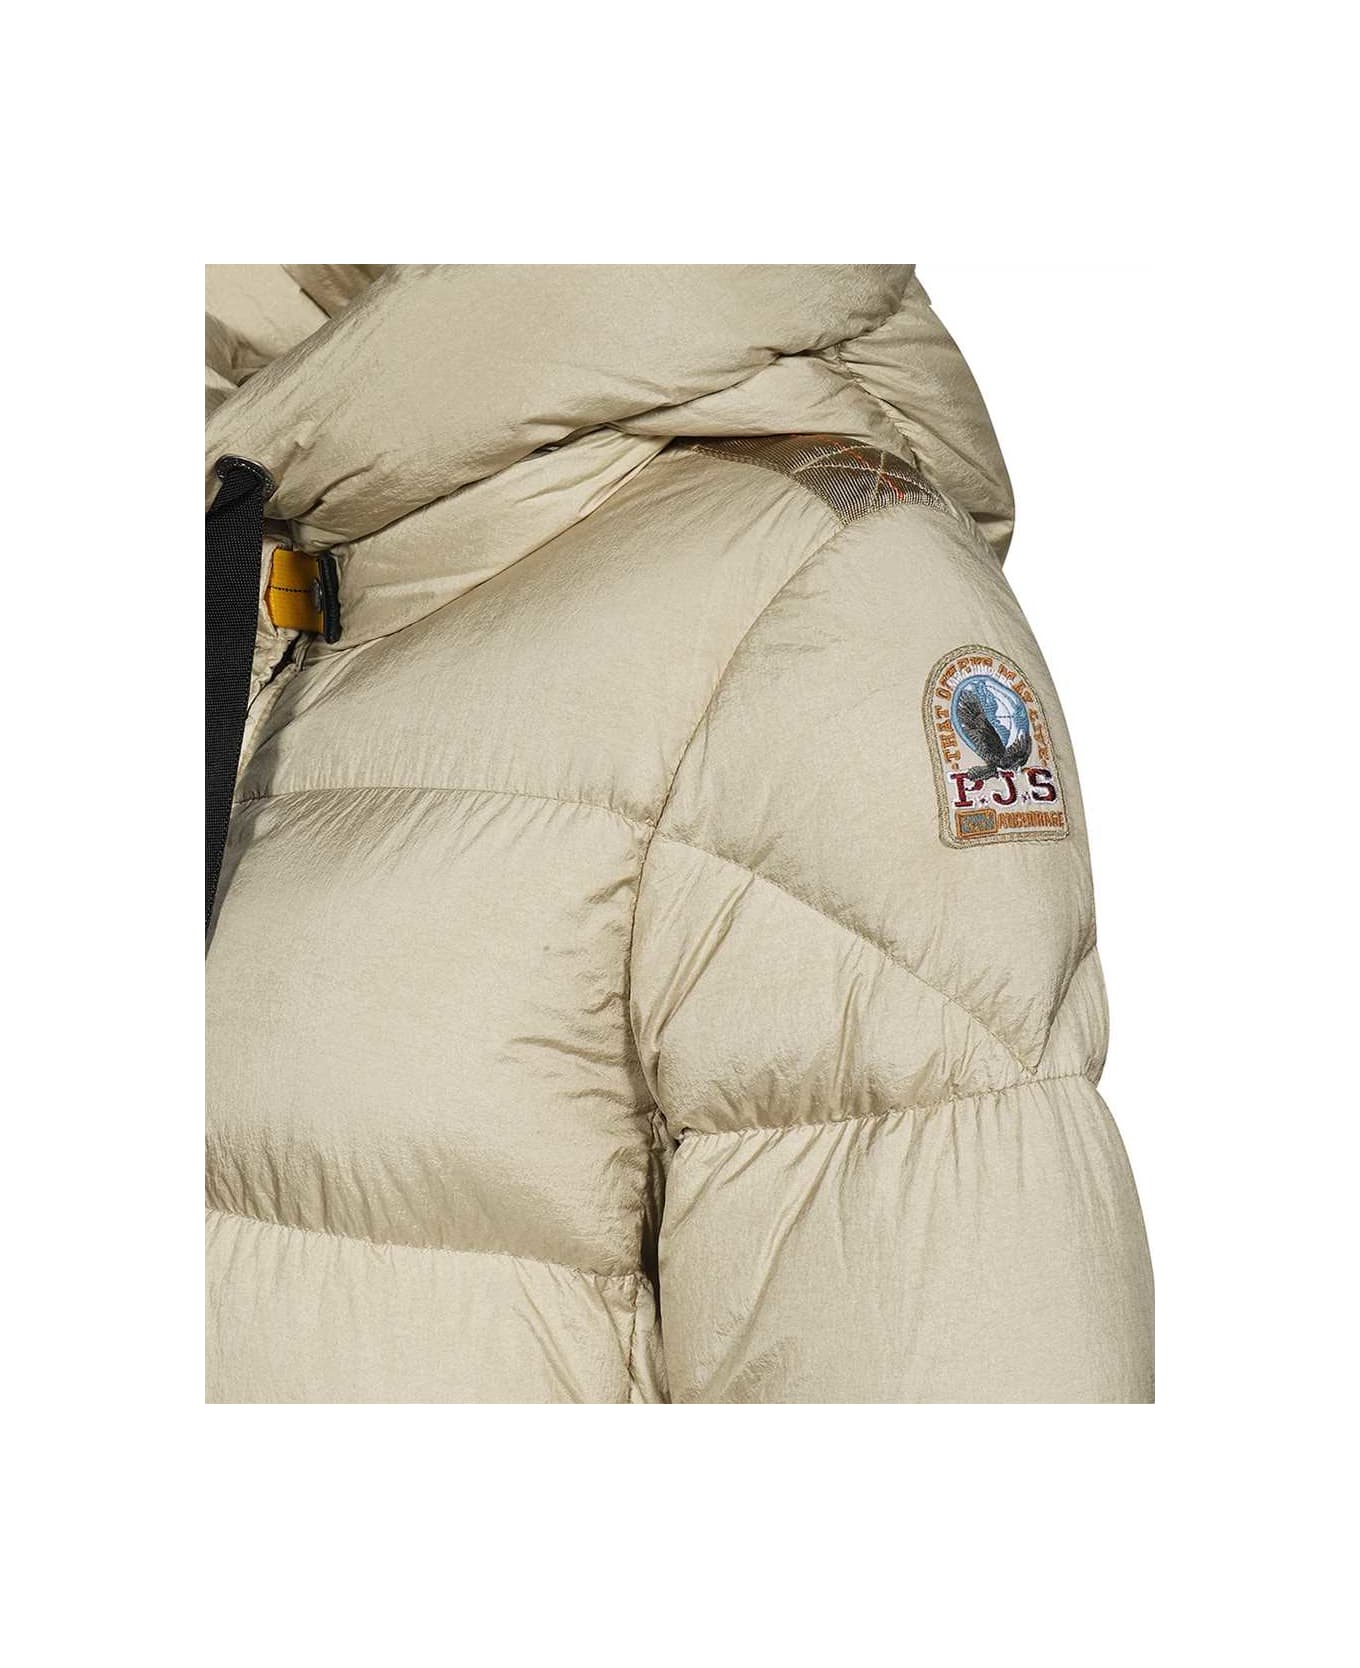 Parajumpers Harmony Long Hooded Down Jacket - Beige コート